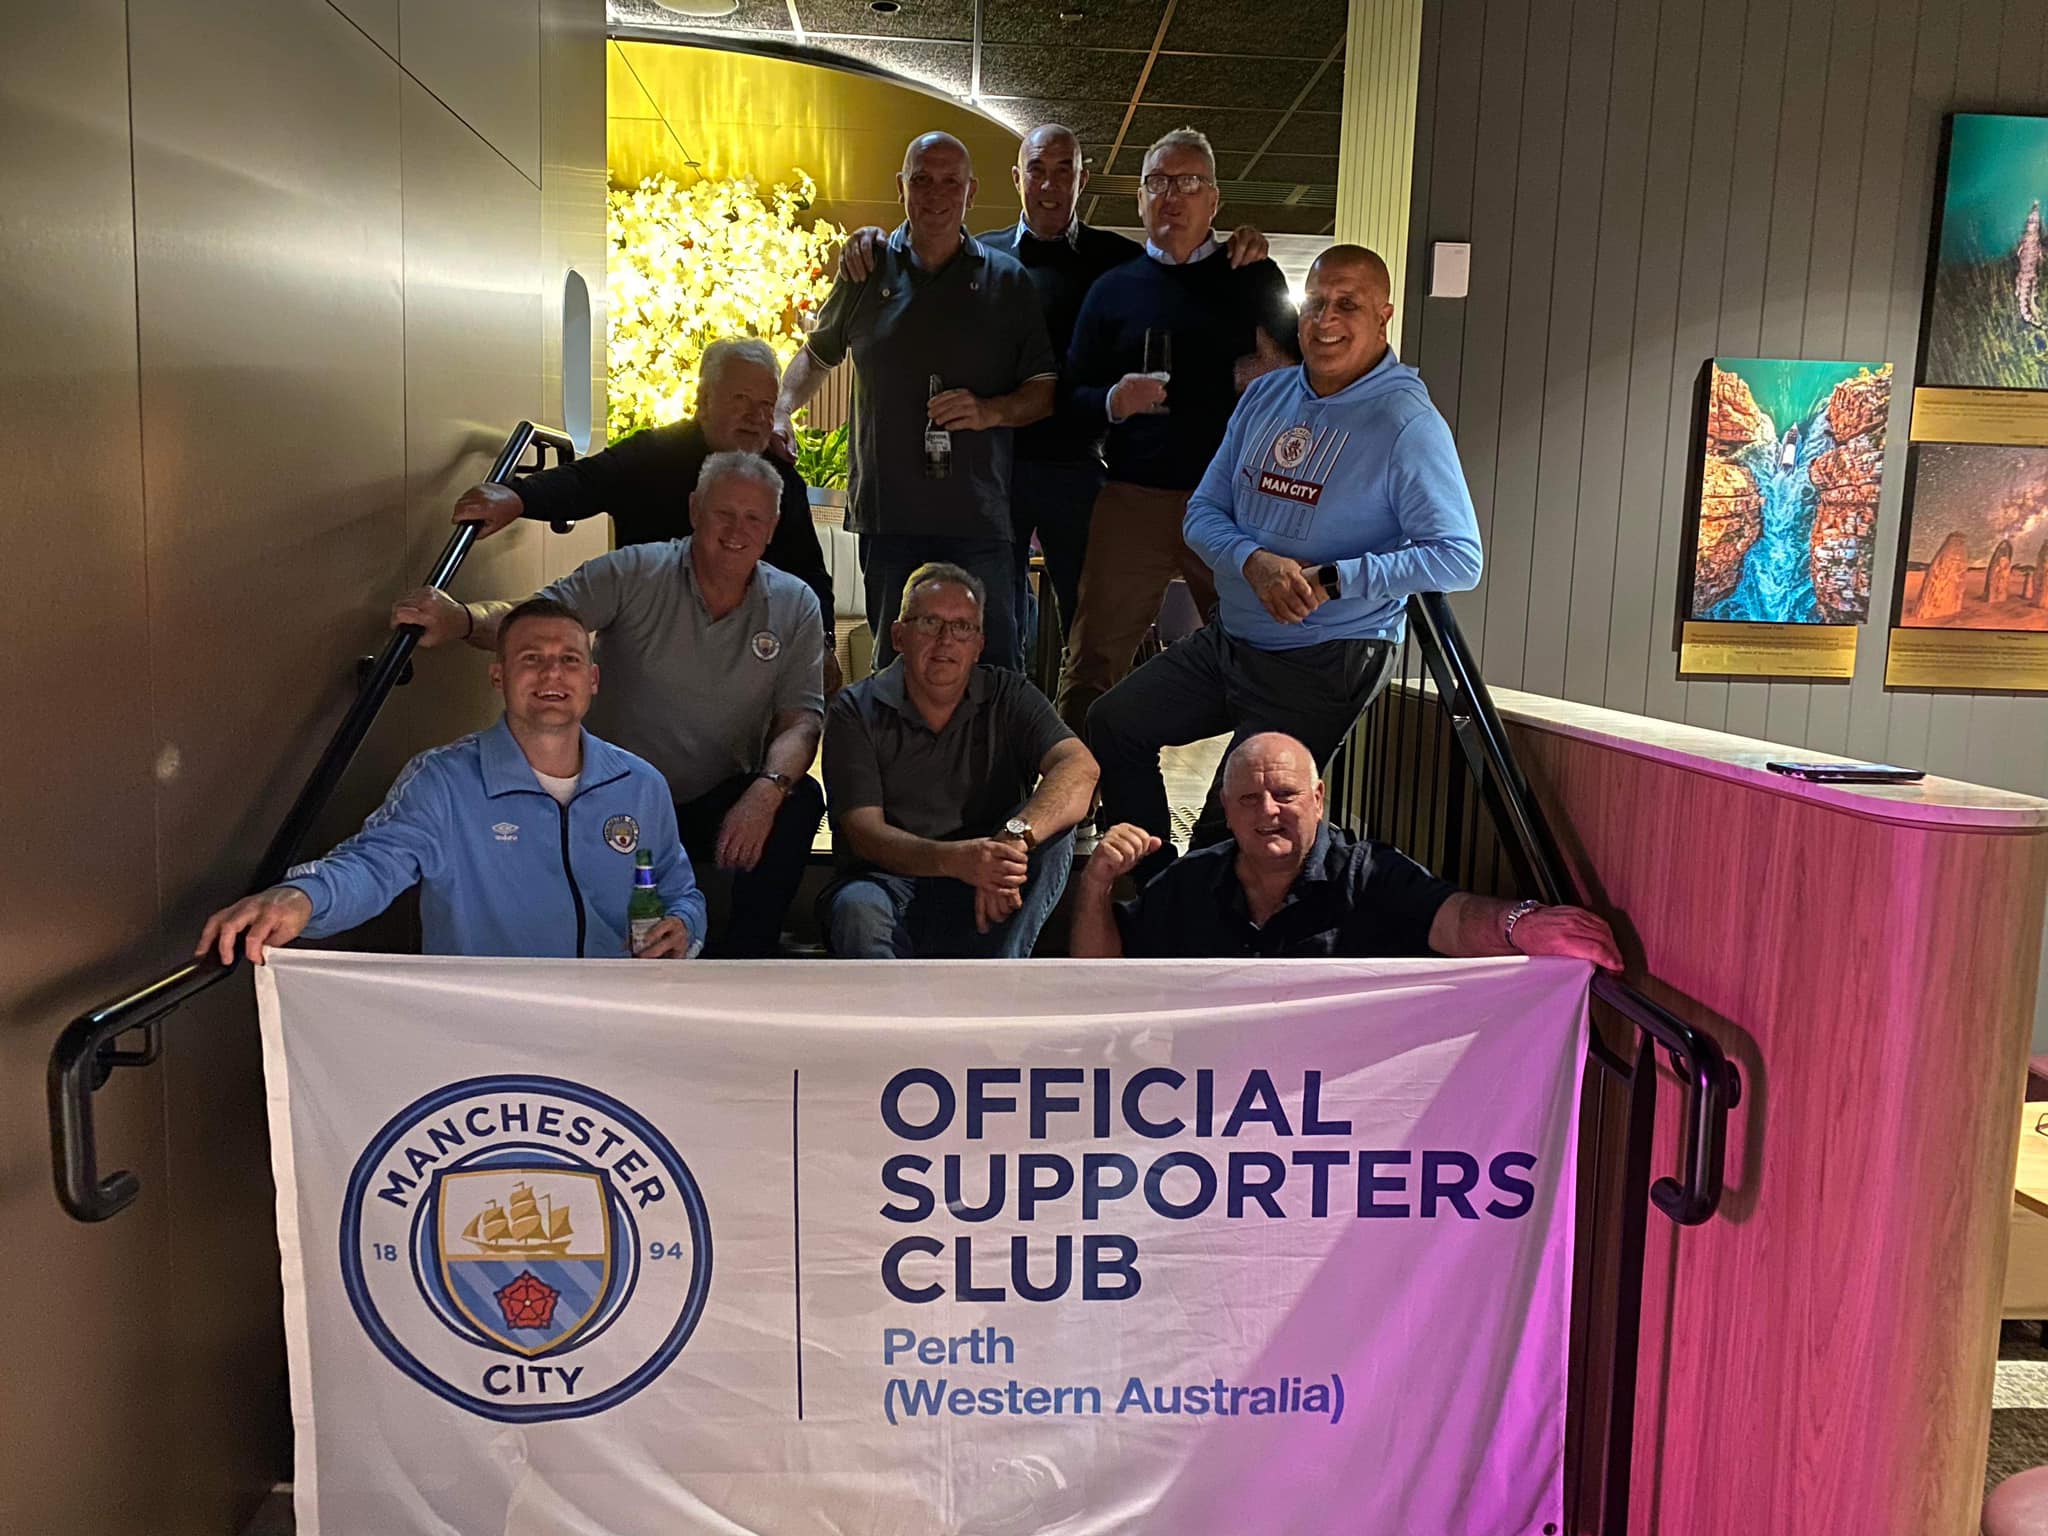 Man City's Official Supporters Clubs